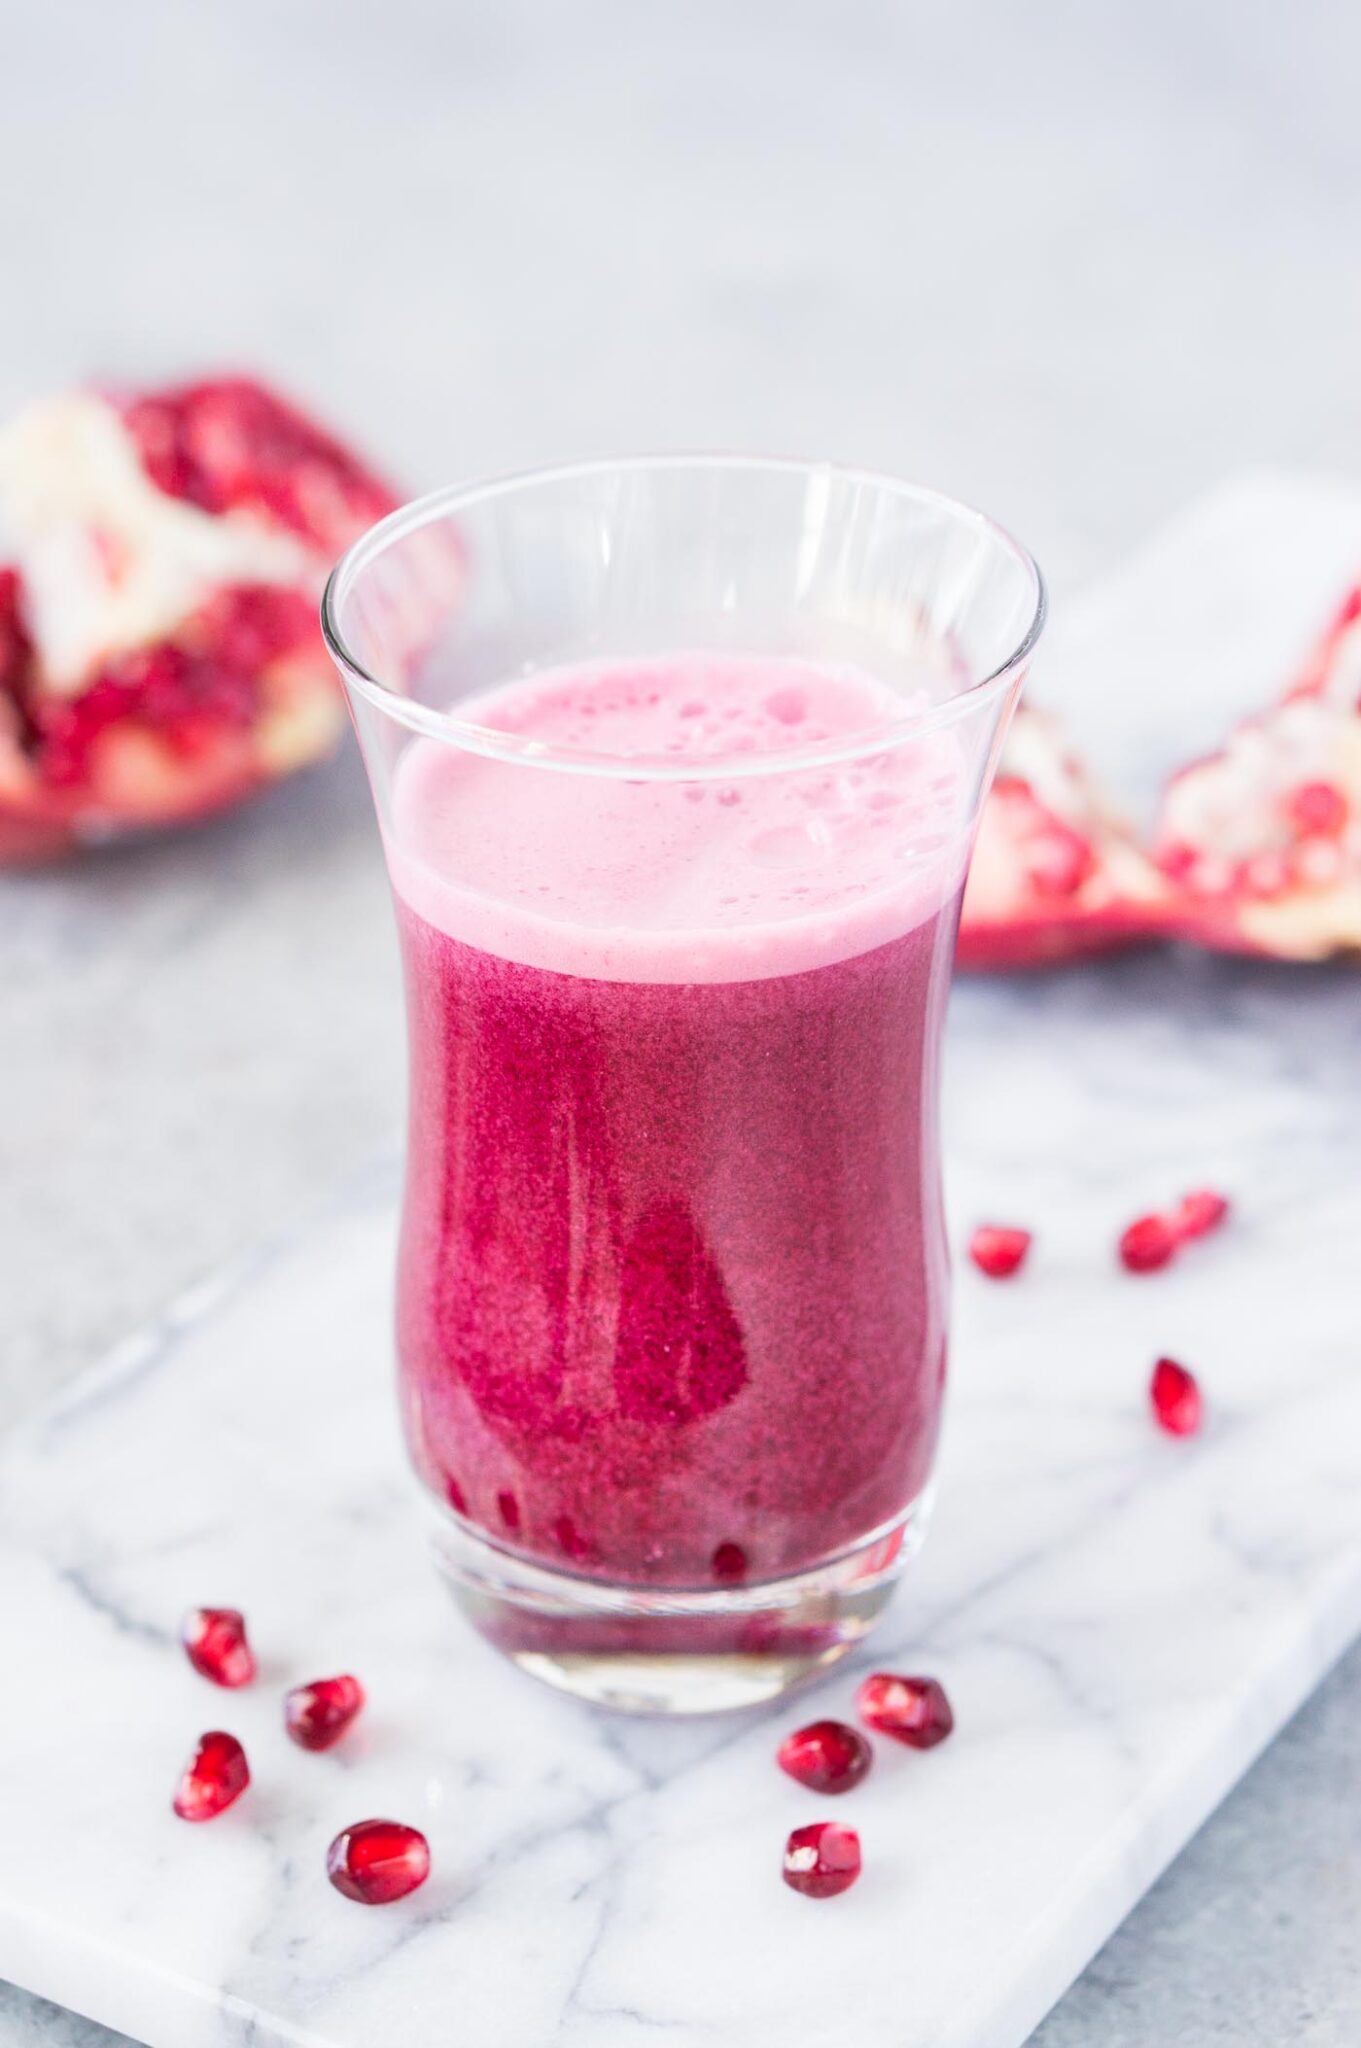 close up image of juiced pomegranate arils in a glass